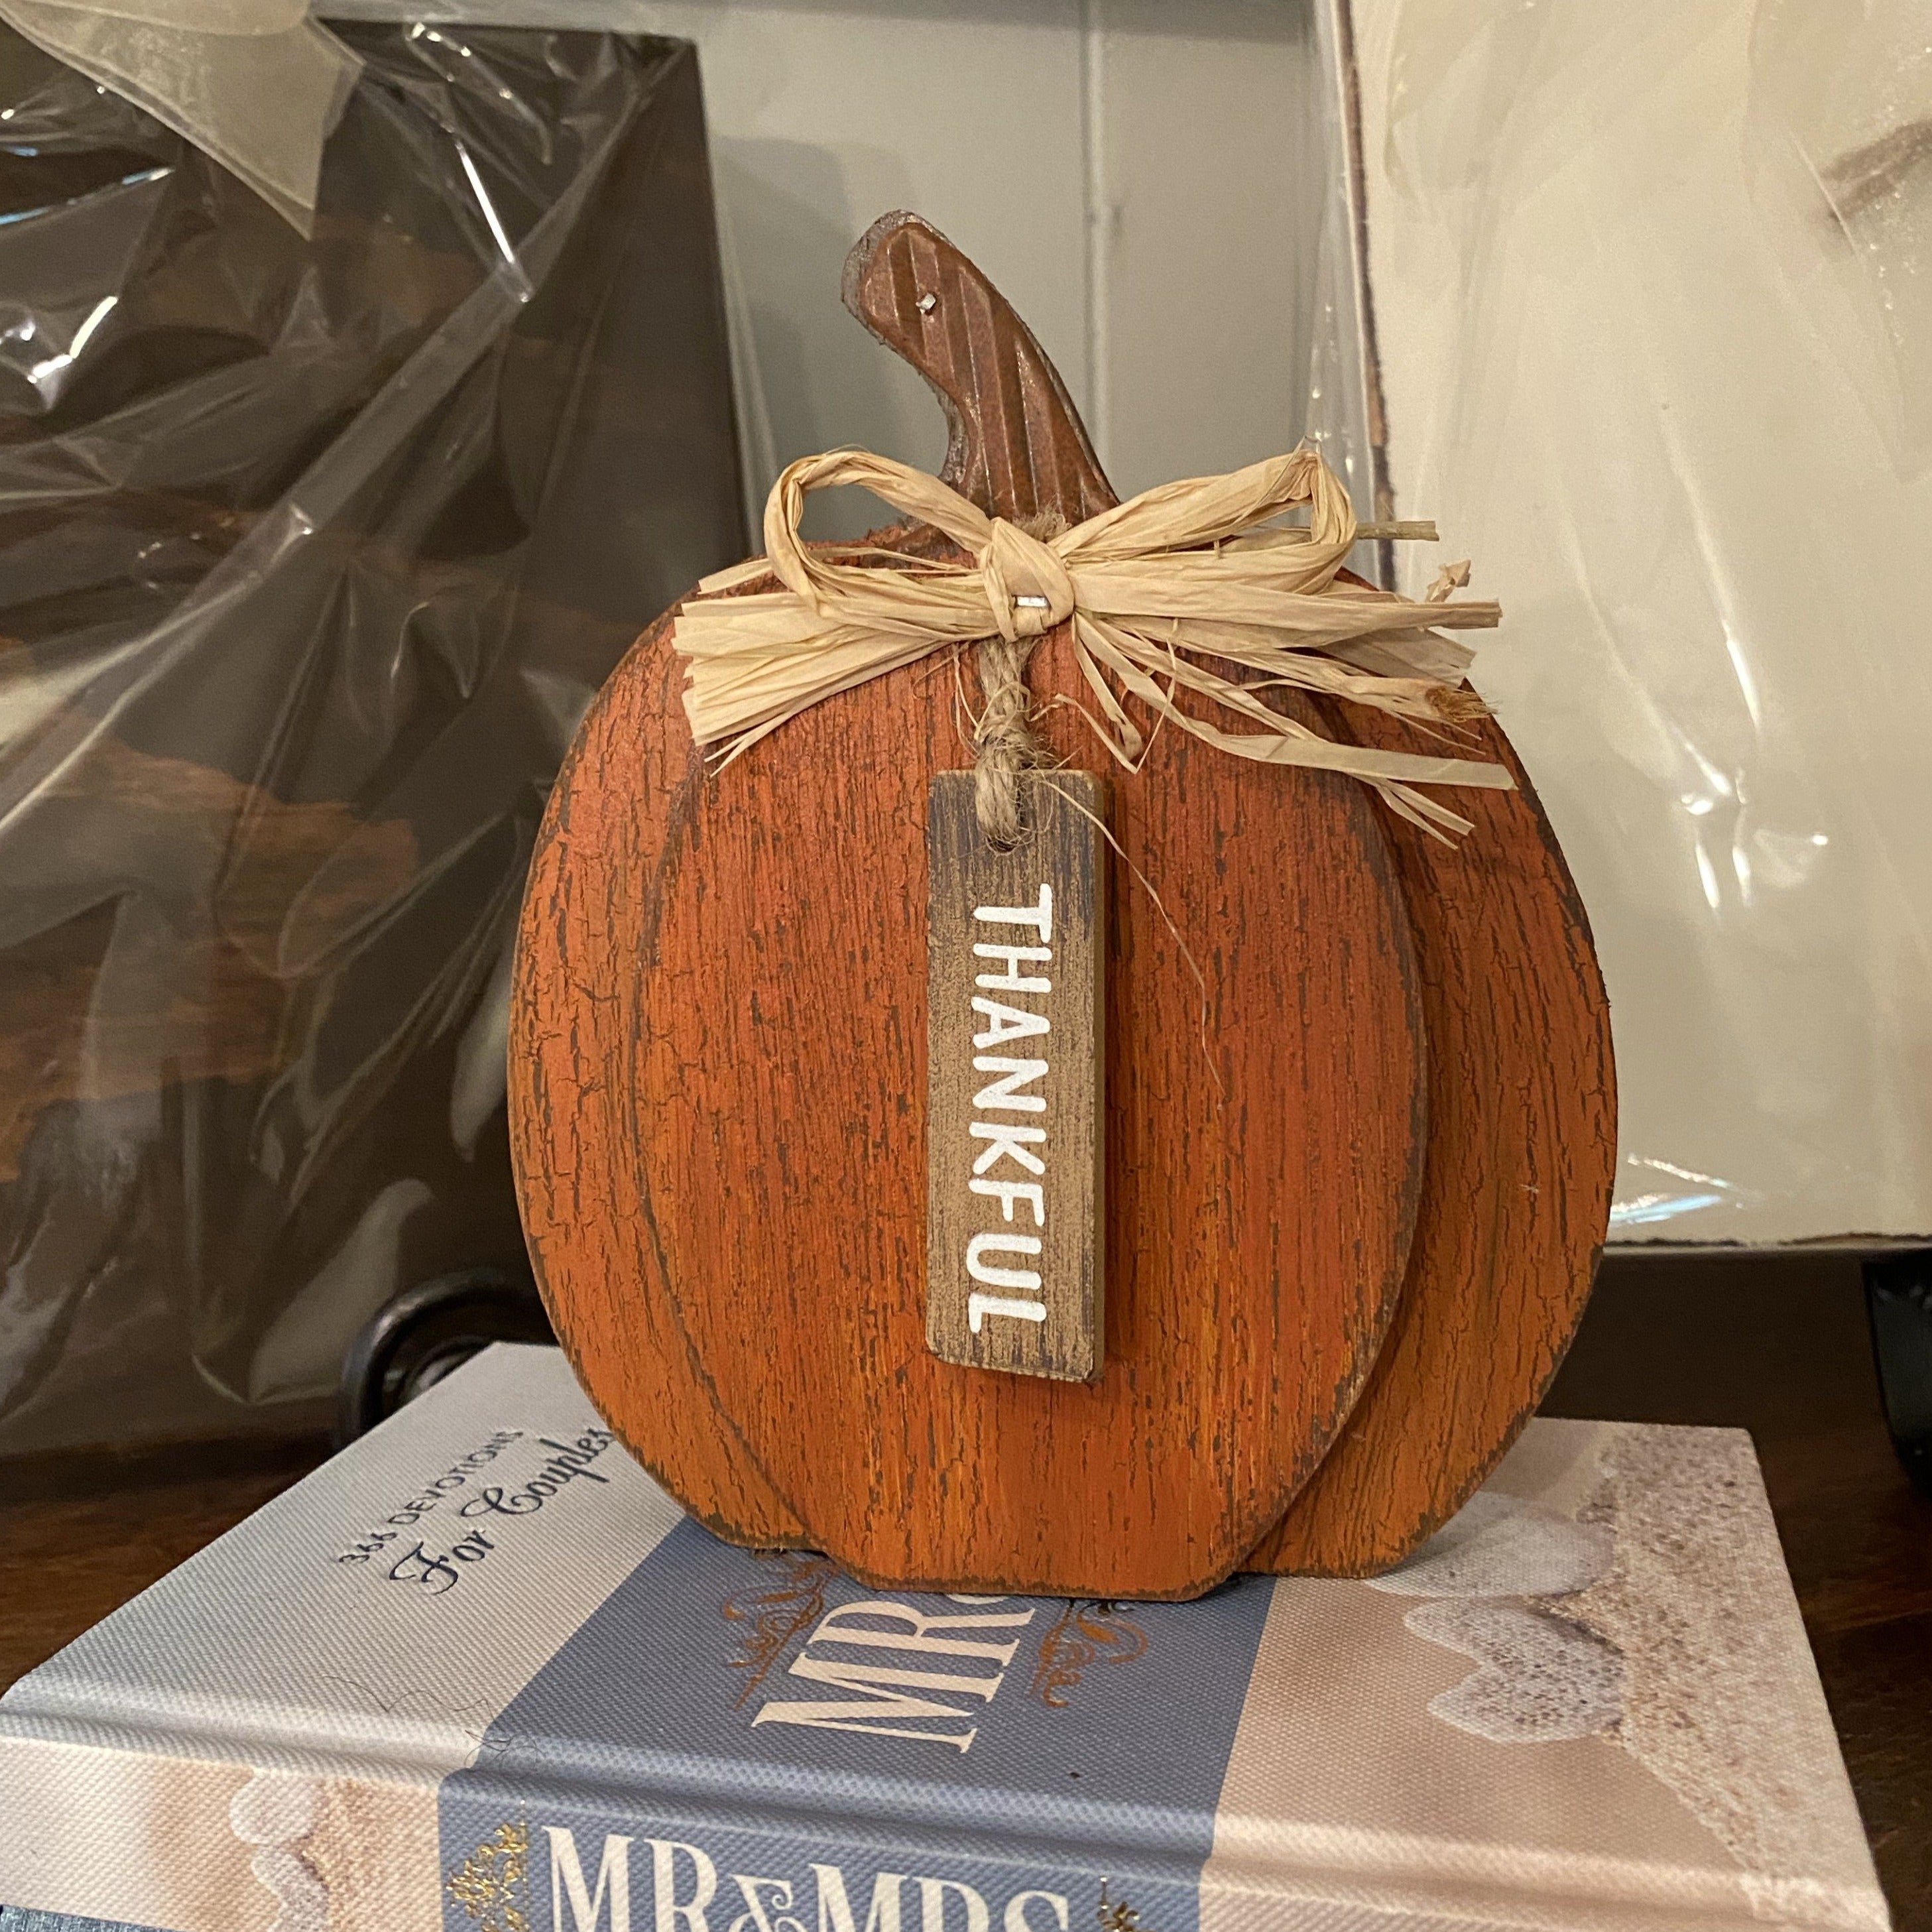 Rustic finished, orange wooden 2 dimensional pumpkin with brown stem, raffia bow and tag says Thankful